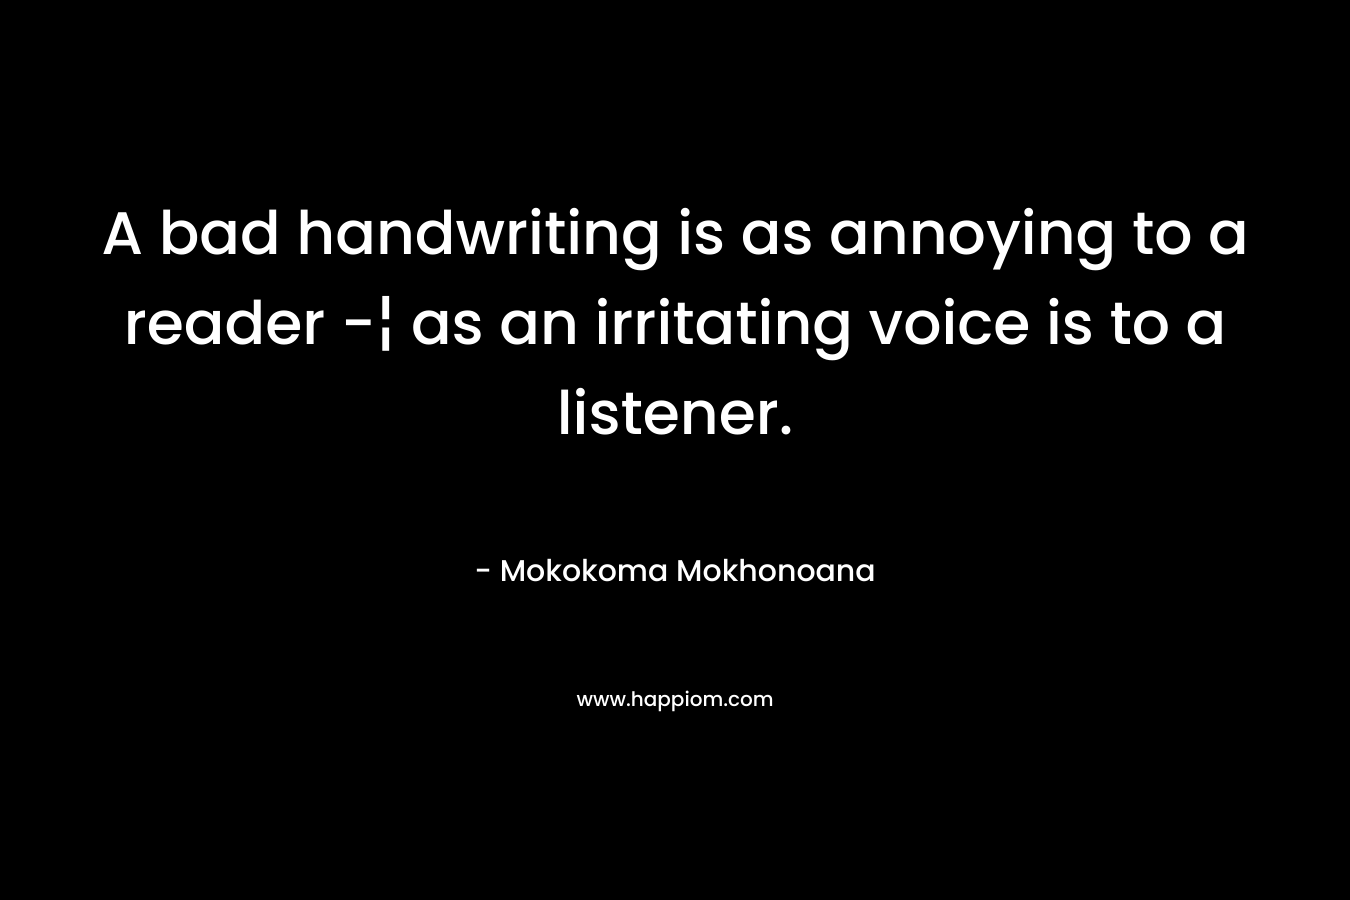 A bad handwriting is as annoying to a reader -¦ as an irritating voice is to a listener. – Mokokoma Mokhonoana